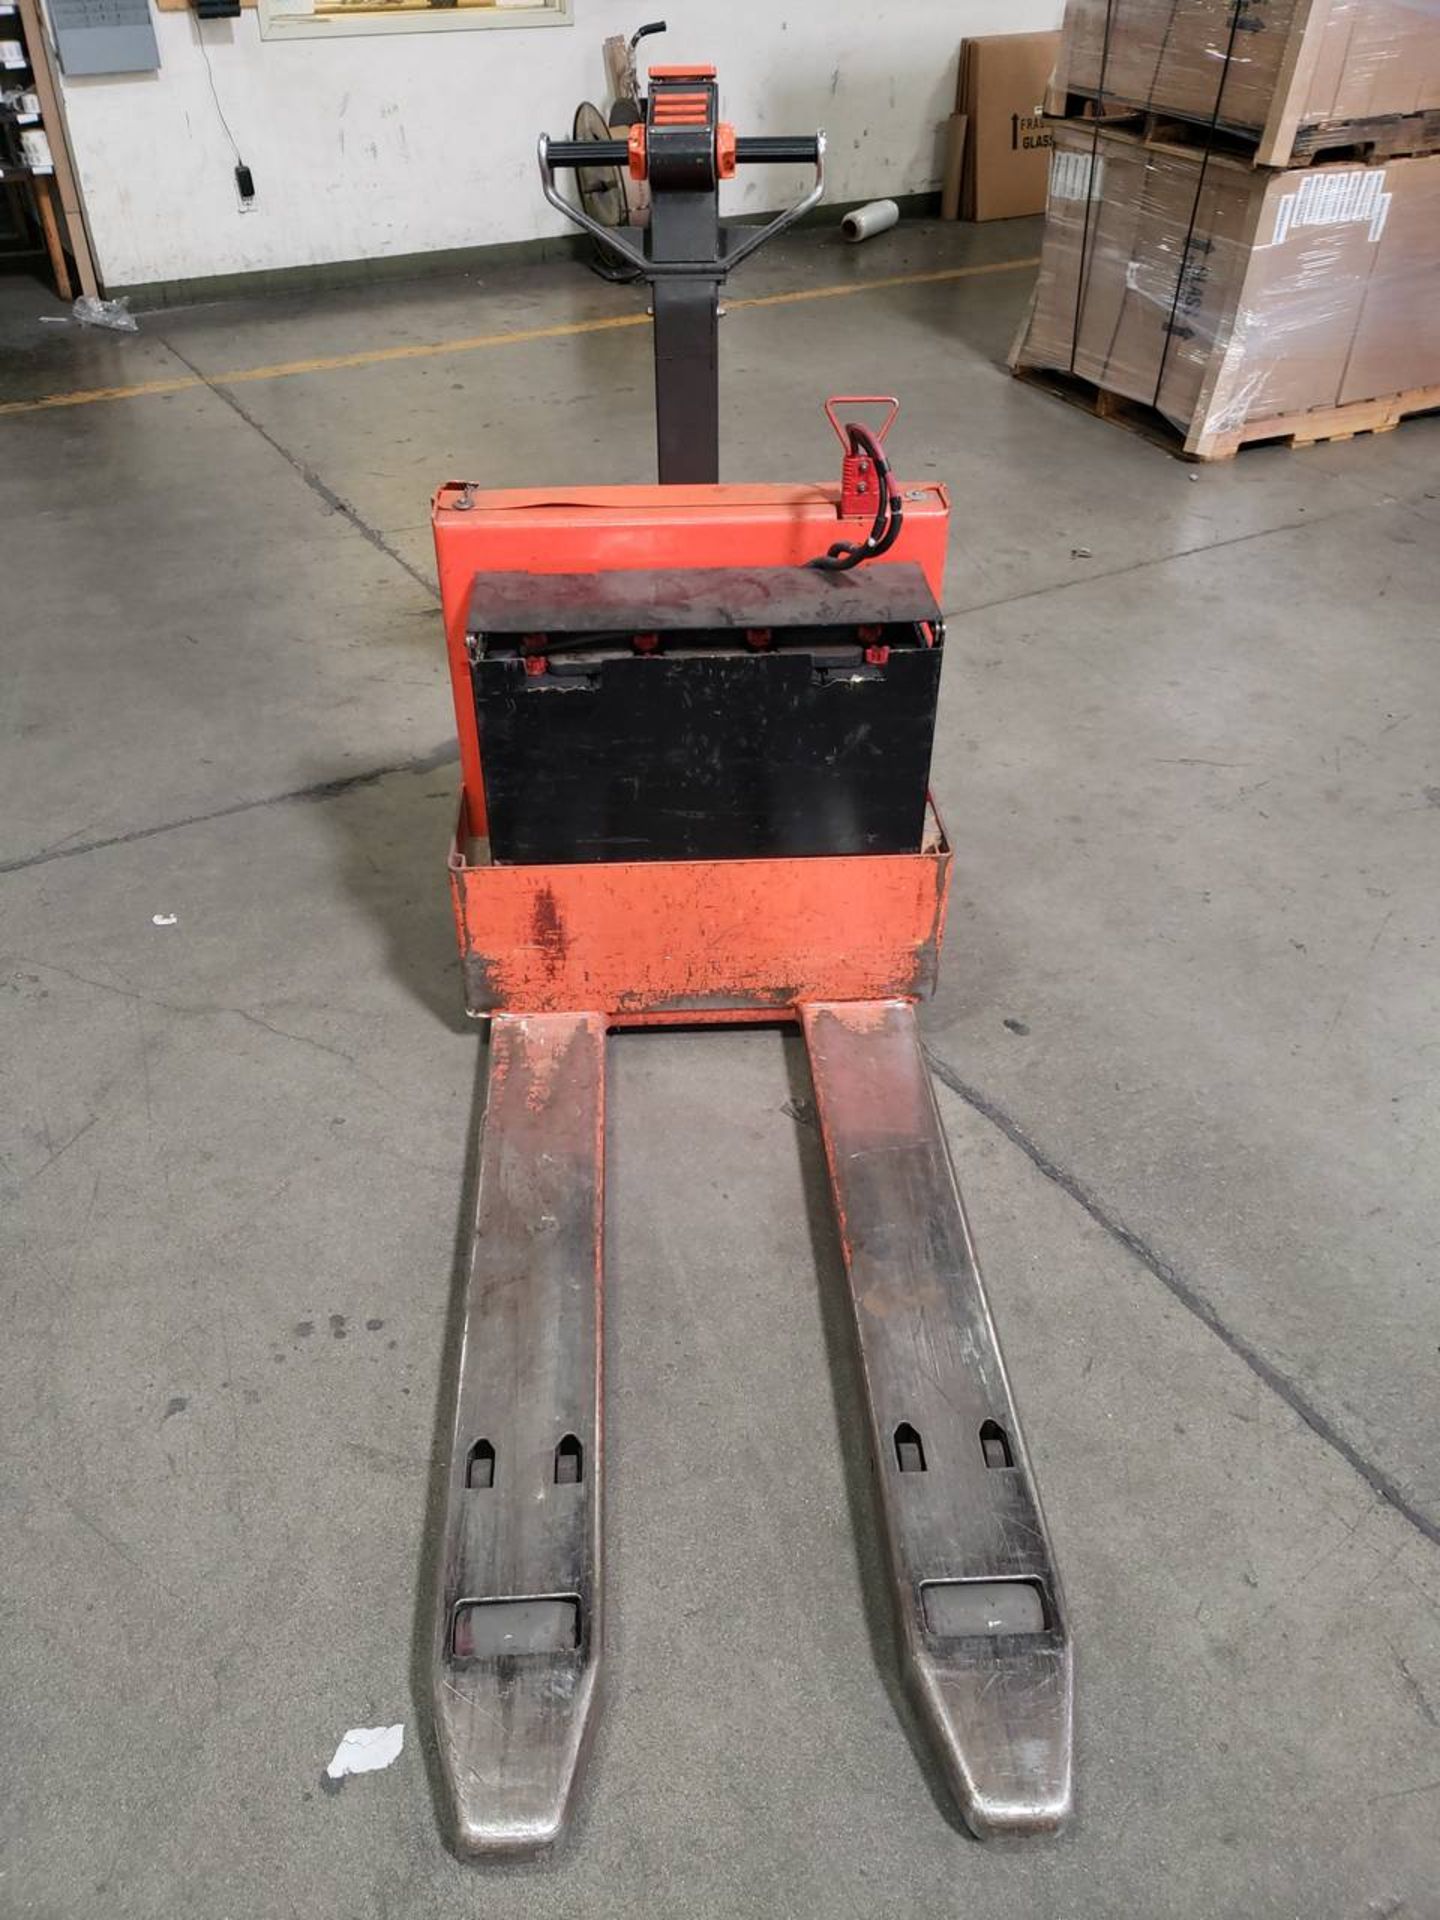 Toyota 6HBW20 24V Electric Pallet Jack 2 Ton Max Capacity, 405.3 Hrs S/N 6HBW20-16381 - Image 2 of 6